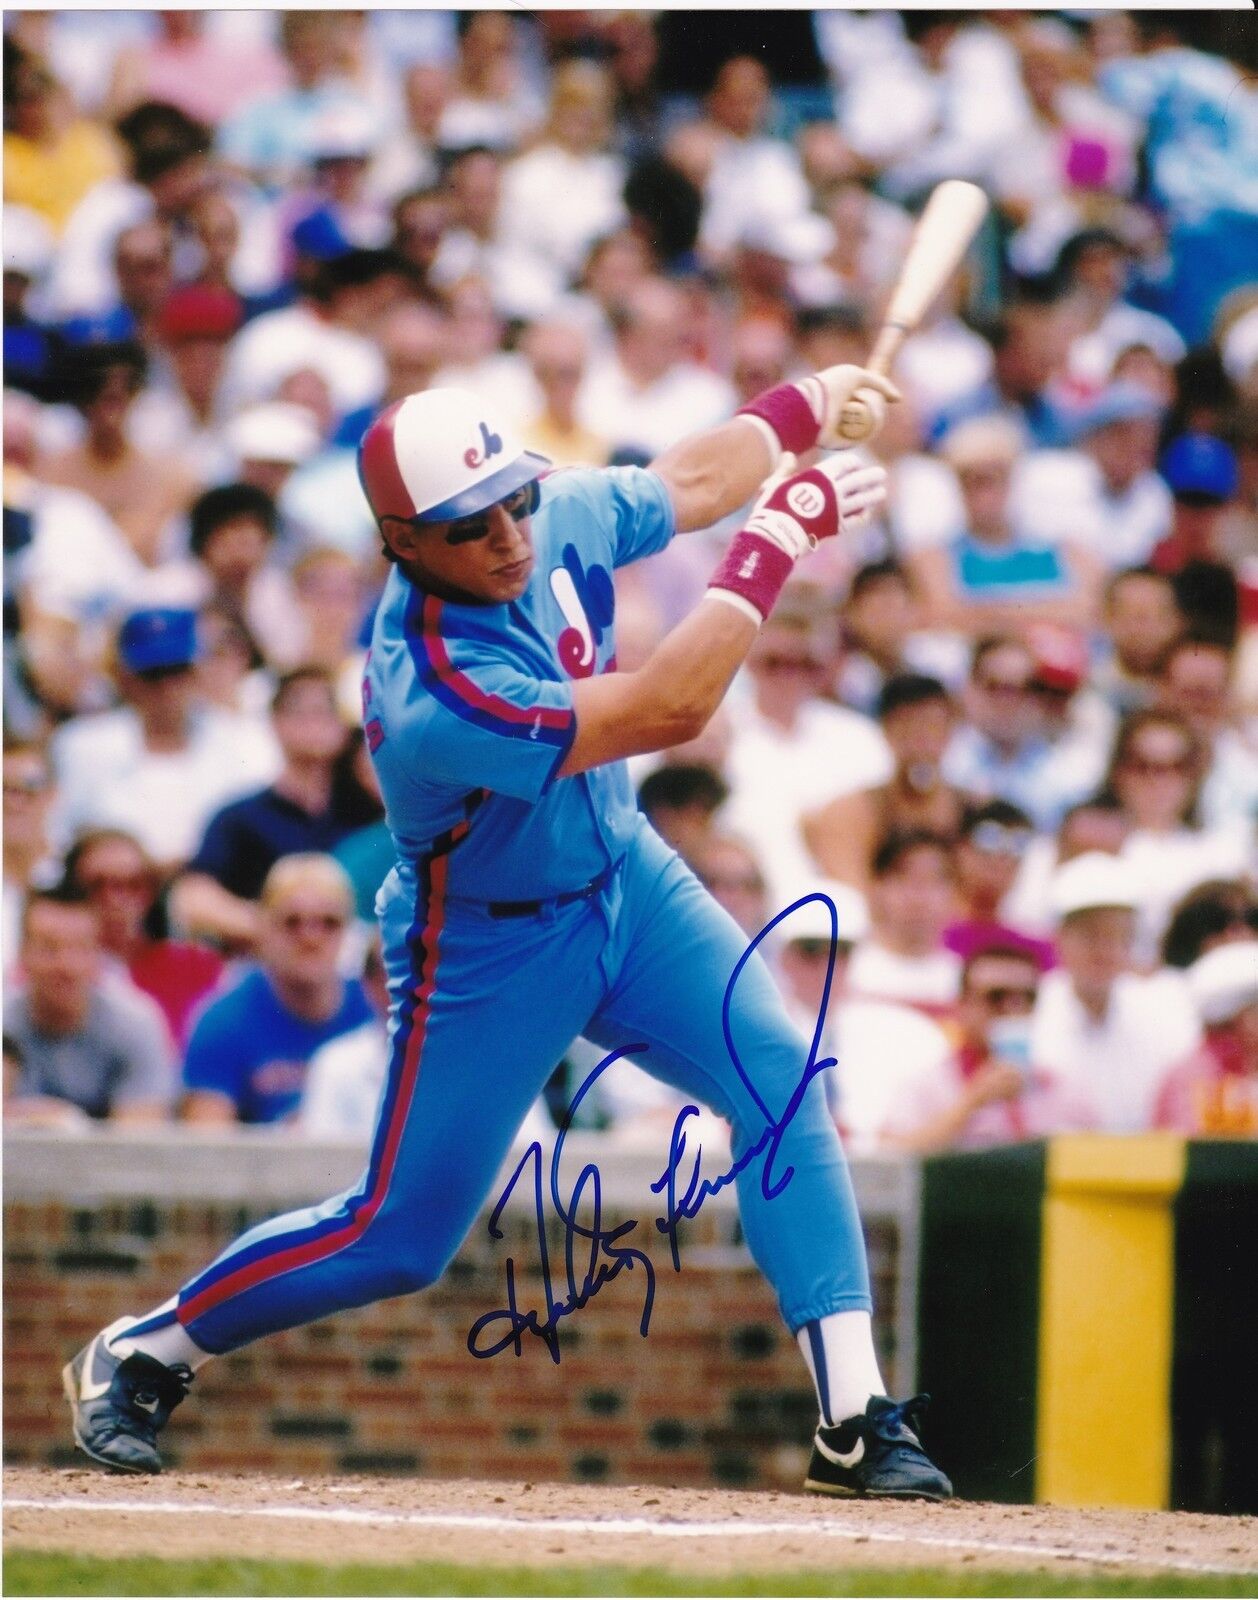 ANDRES GALARRAGA MONTREAL EXPOS ACTION SIGNED 8x10